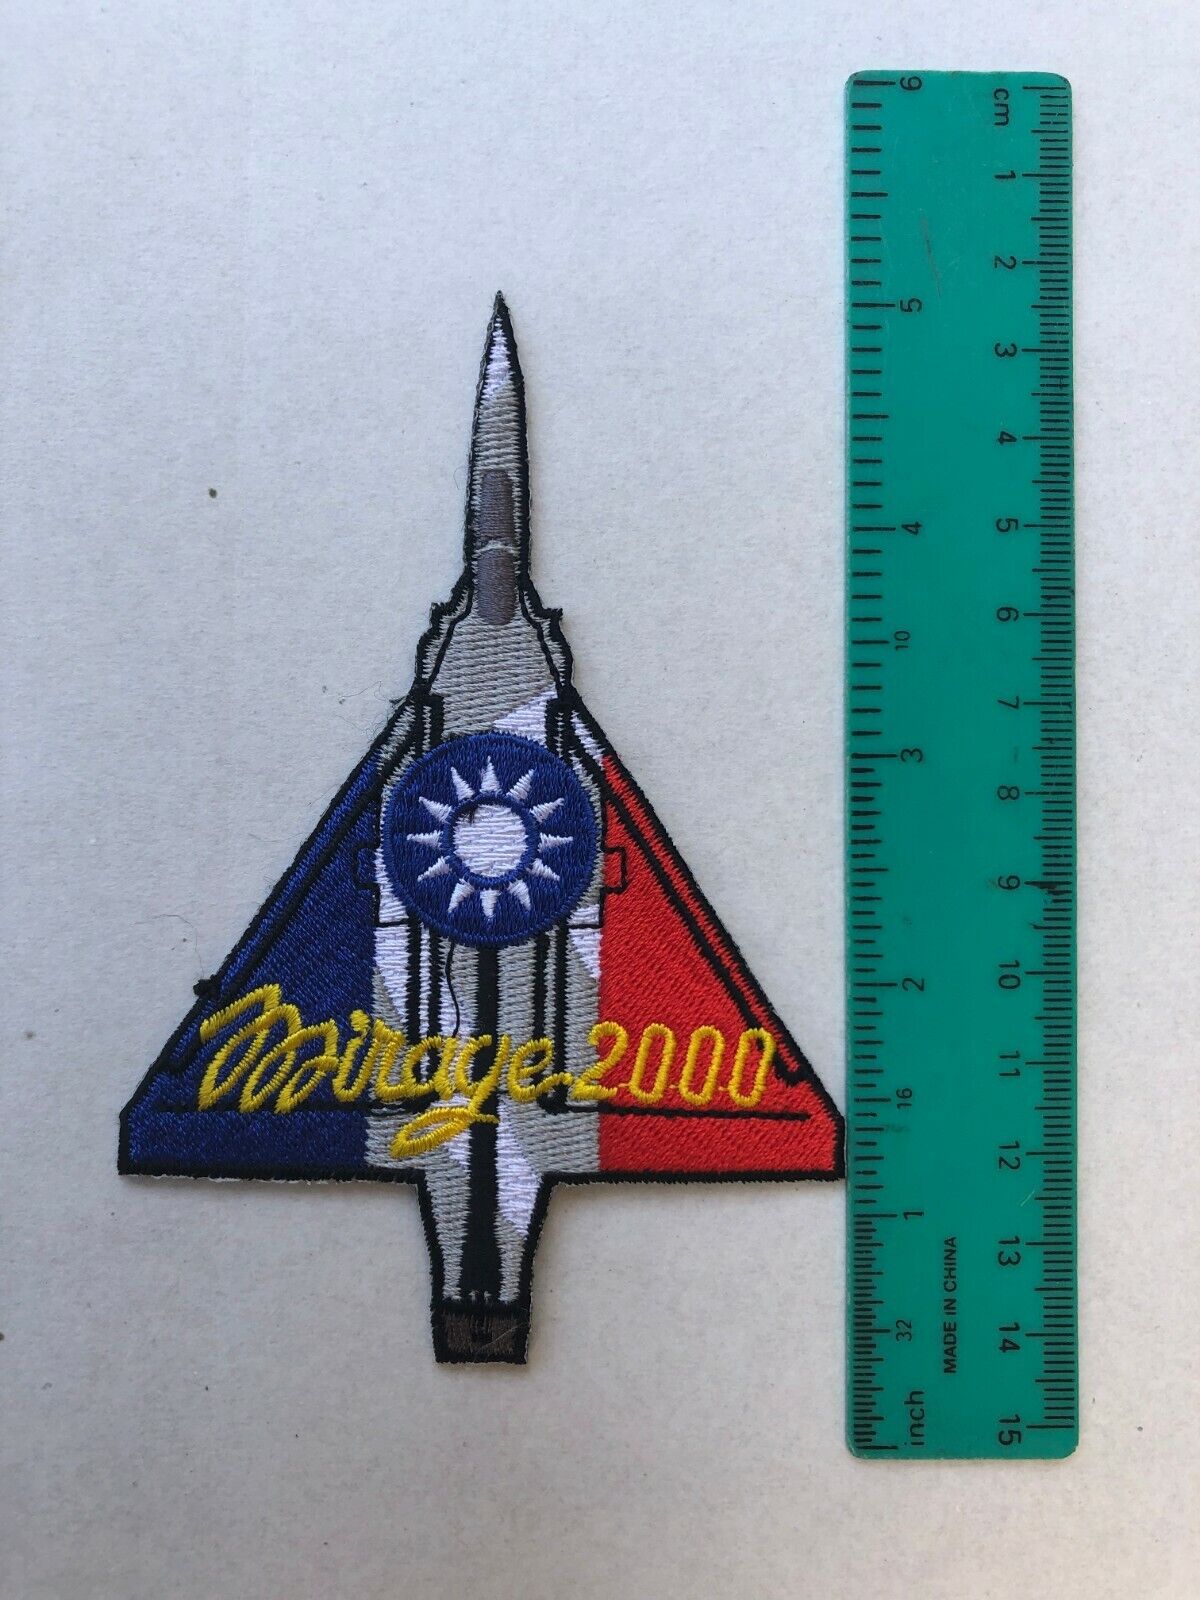 Mirage 2000-5 Taiwan Air Force Patch